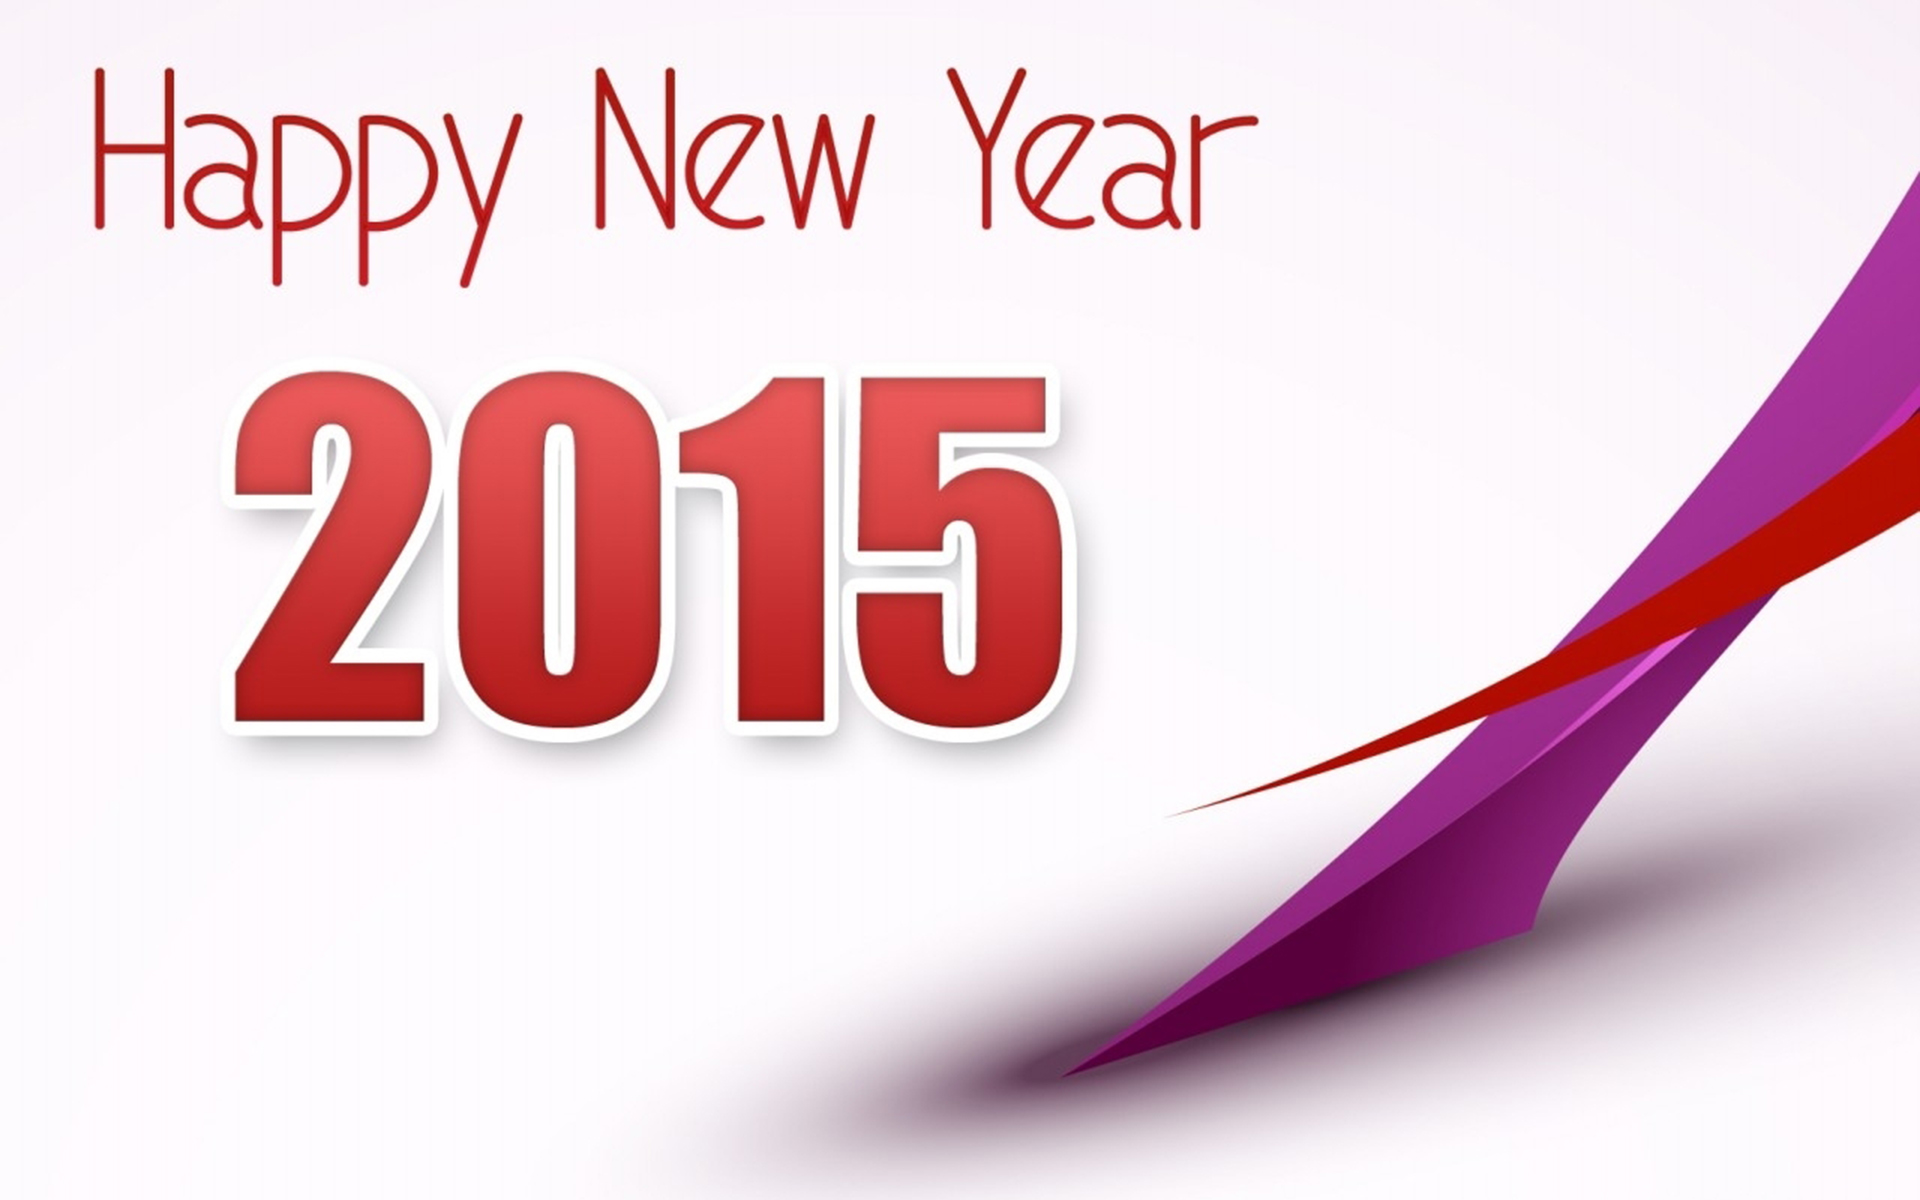 Holiday New Year New Year 2015 1920x1200